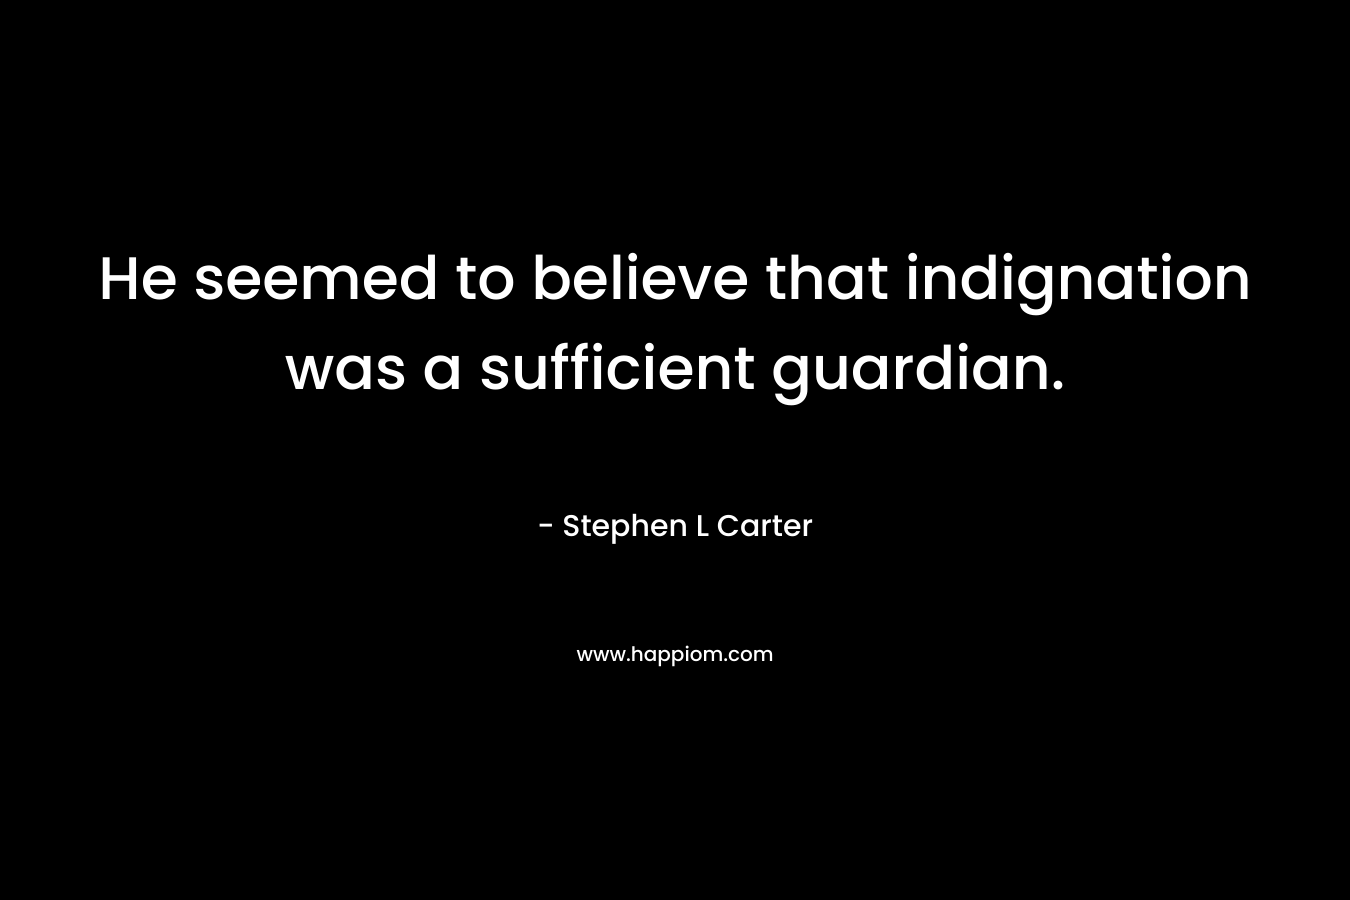 He seemed to believe that indignation was a sufficient guardian. – Stephen L Carter